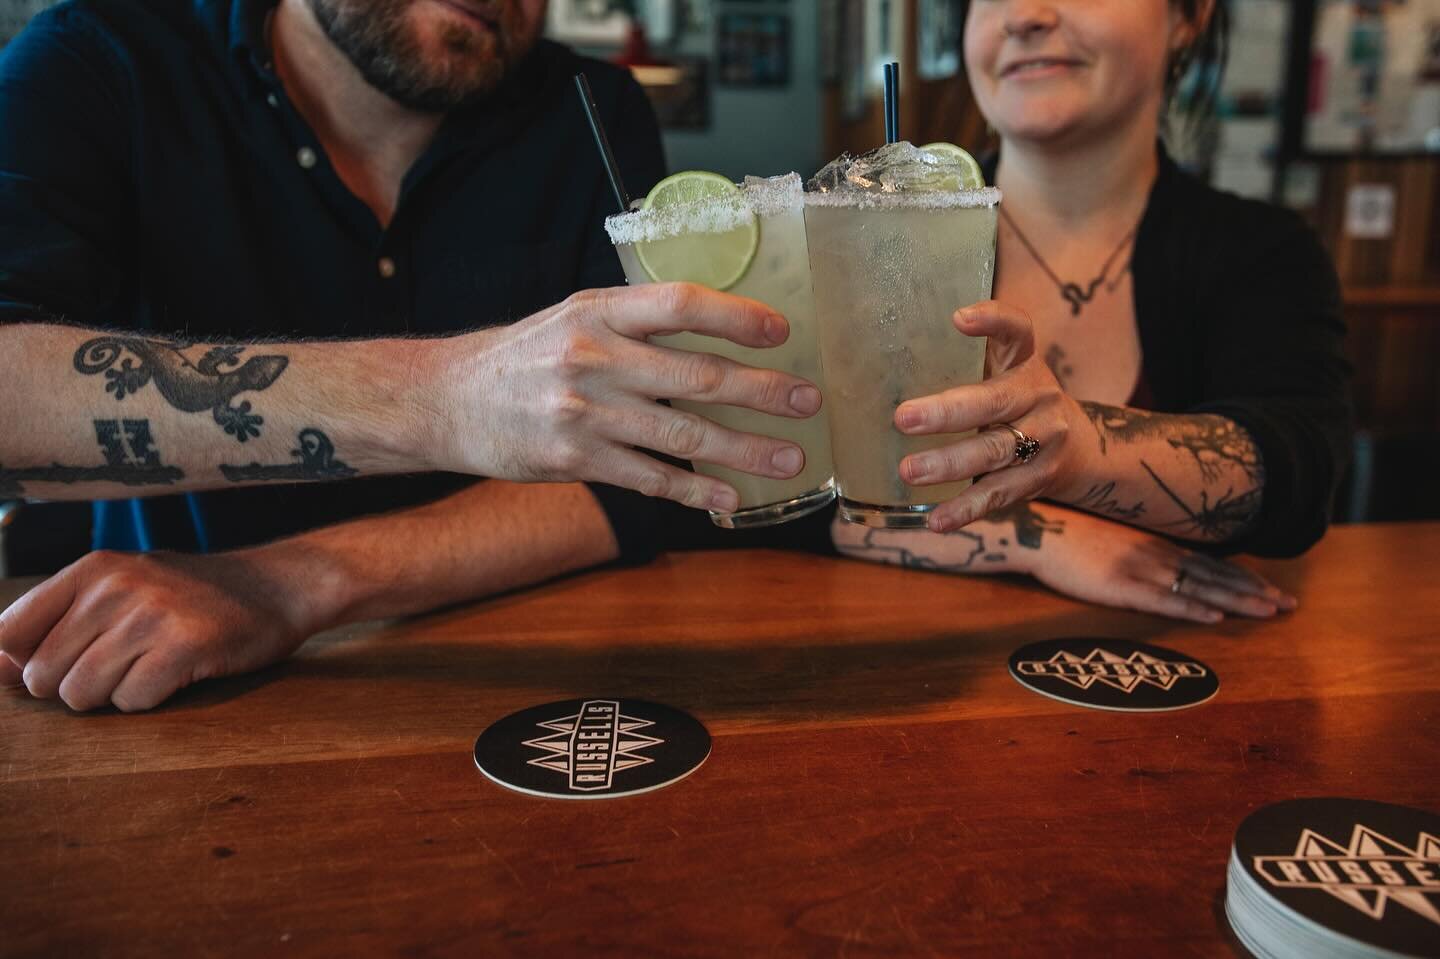 Gentle nudge to join us for Tequila Tuesday, featuring $2 off all tequila pours &amp; margaritas. Bar opens at 4pm, see you soon!